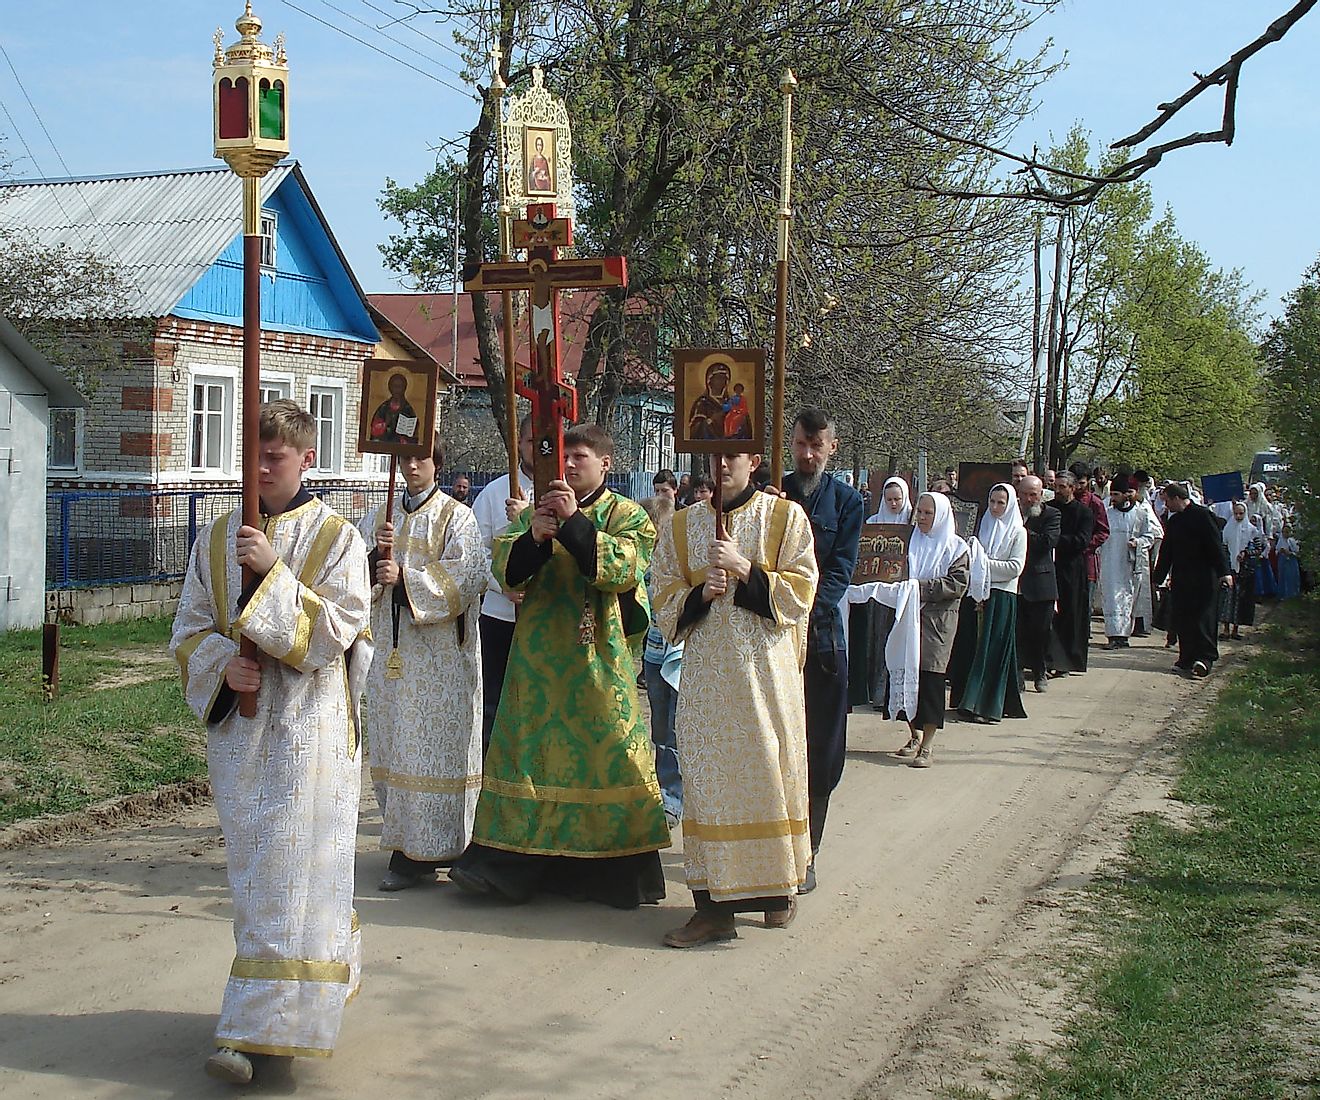 A Traditional Procession By The Members Of The Russian Orthodox Old-Rite Church